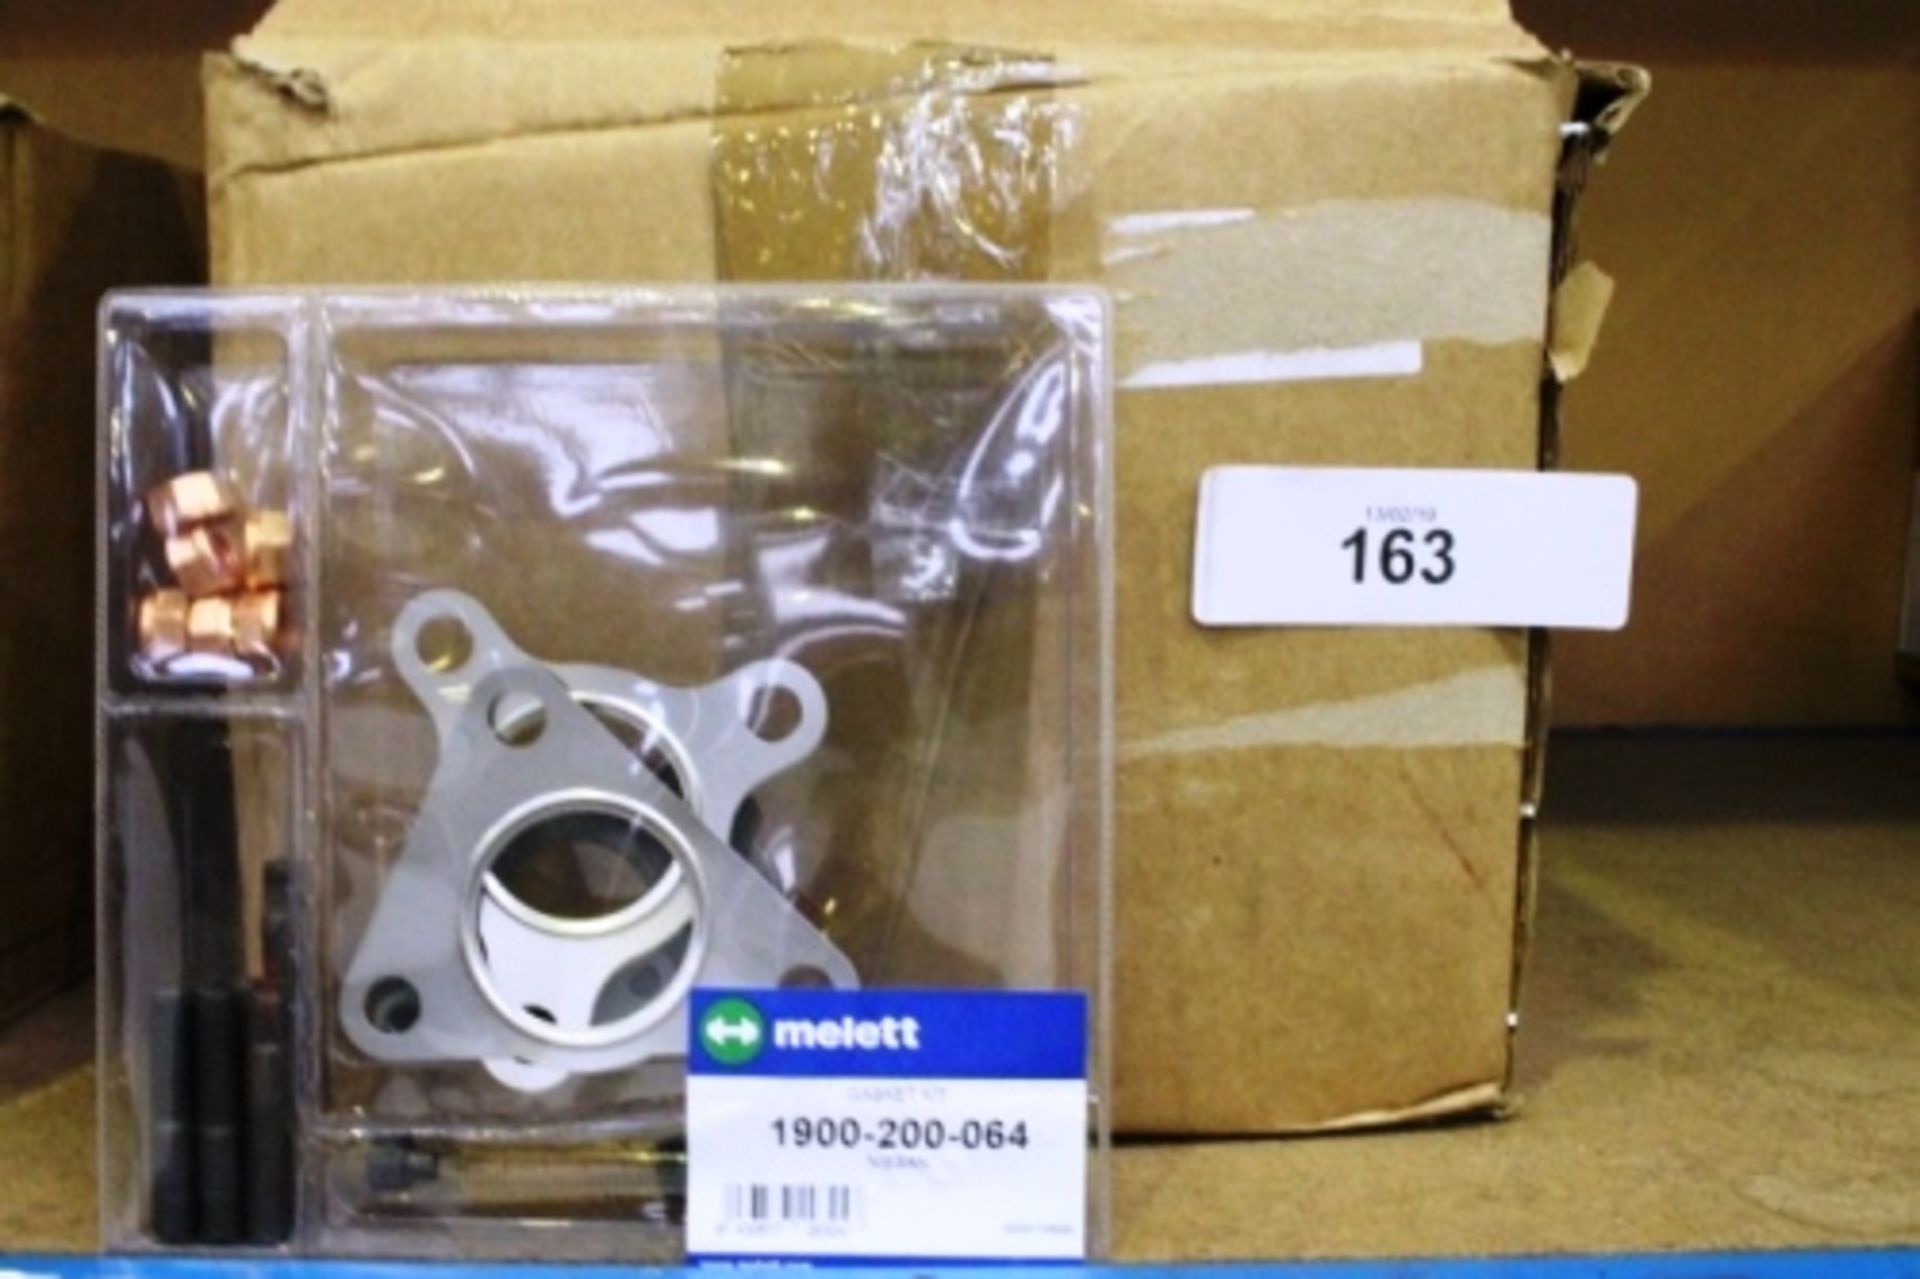 20 x Melett Nissan gasket nut and bolt kits, reference number 1900-200-064, total RRP £200 -